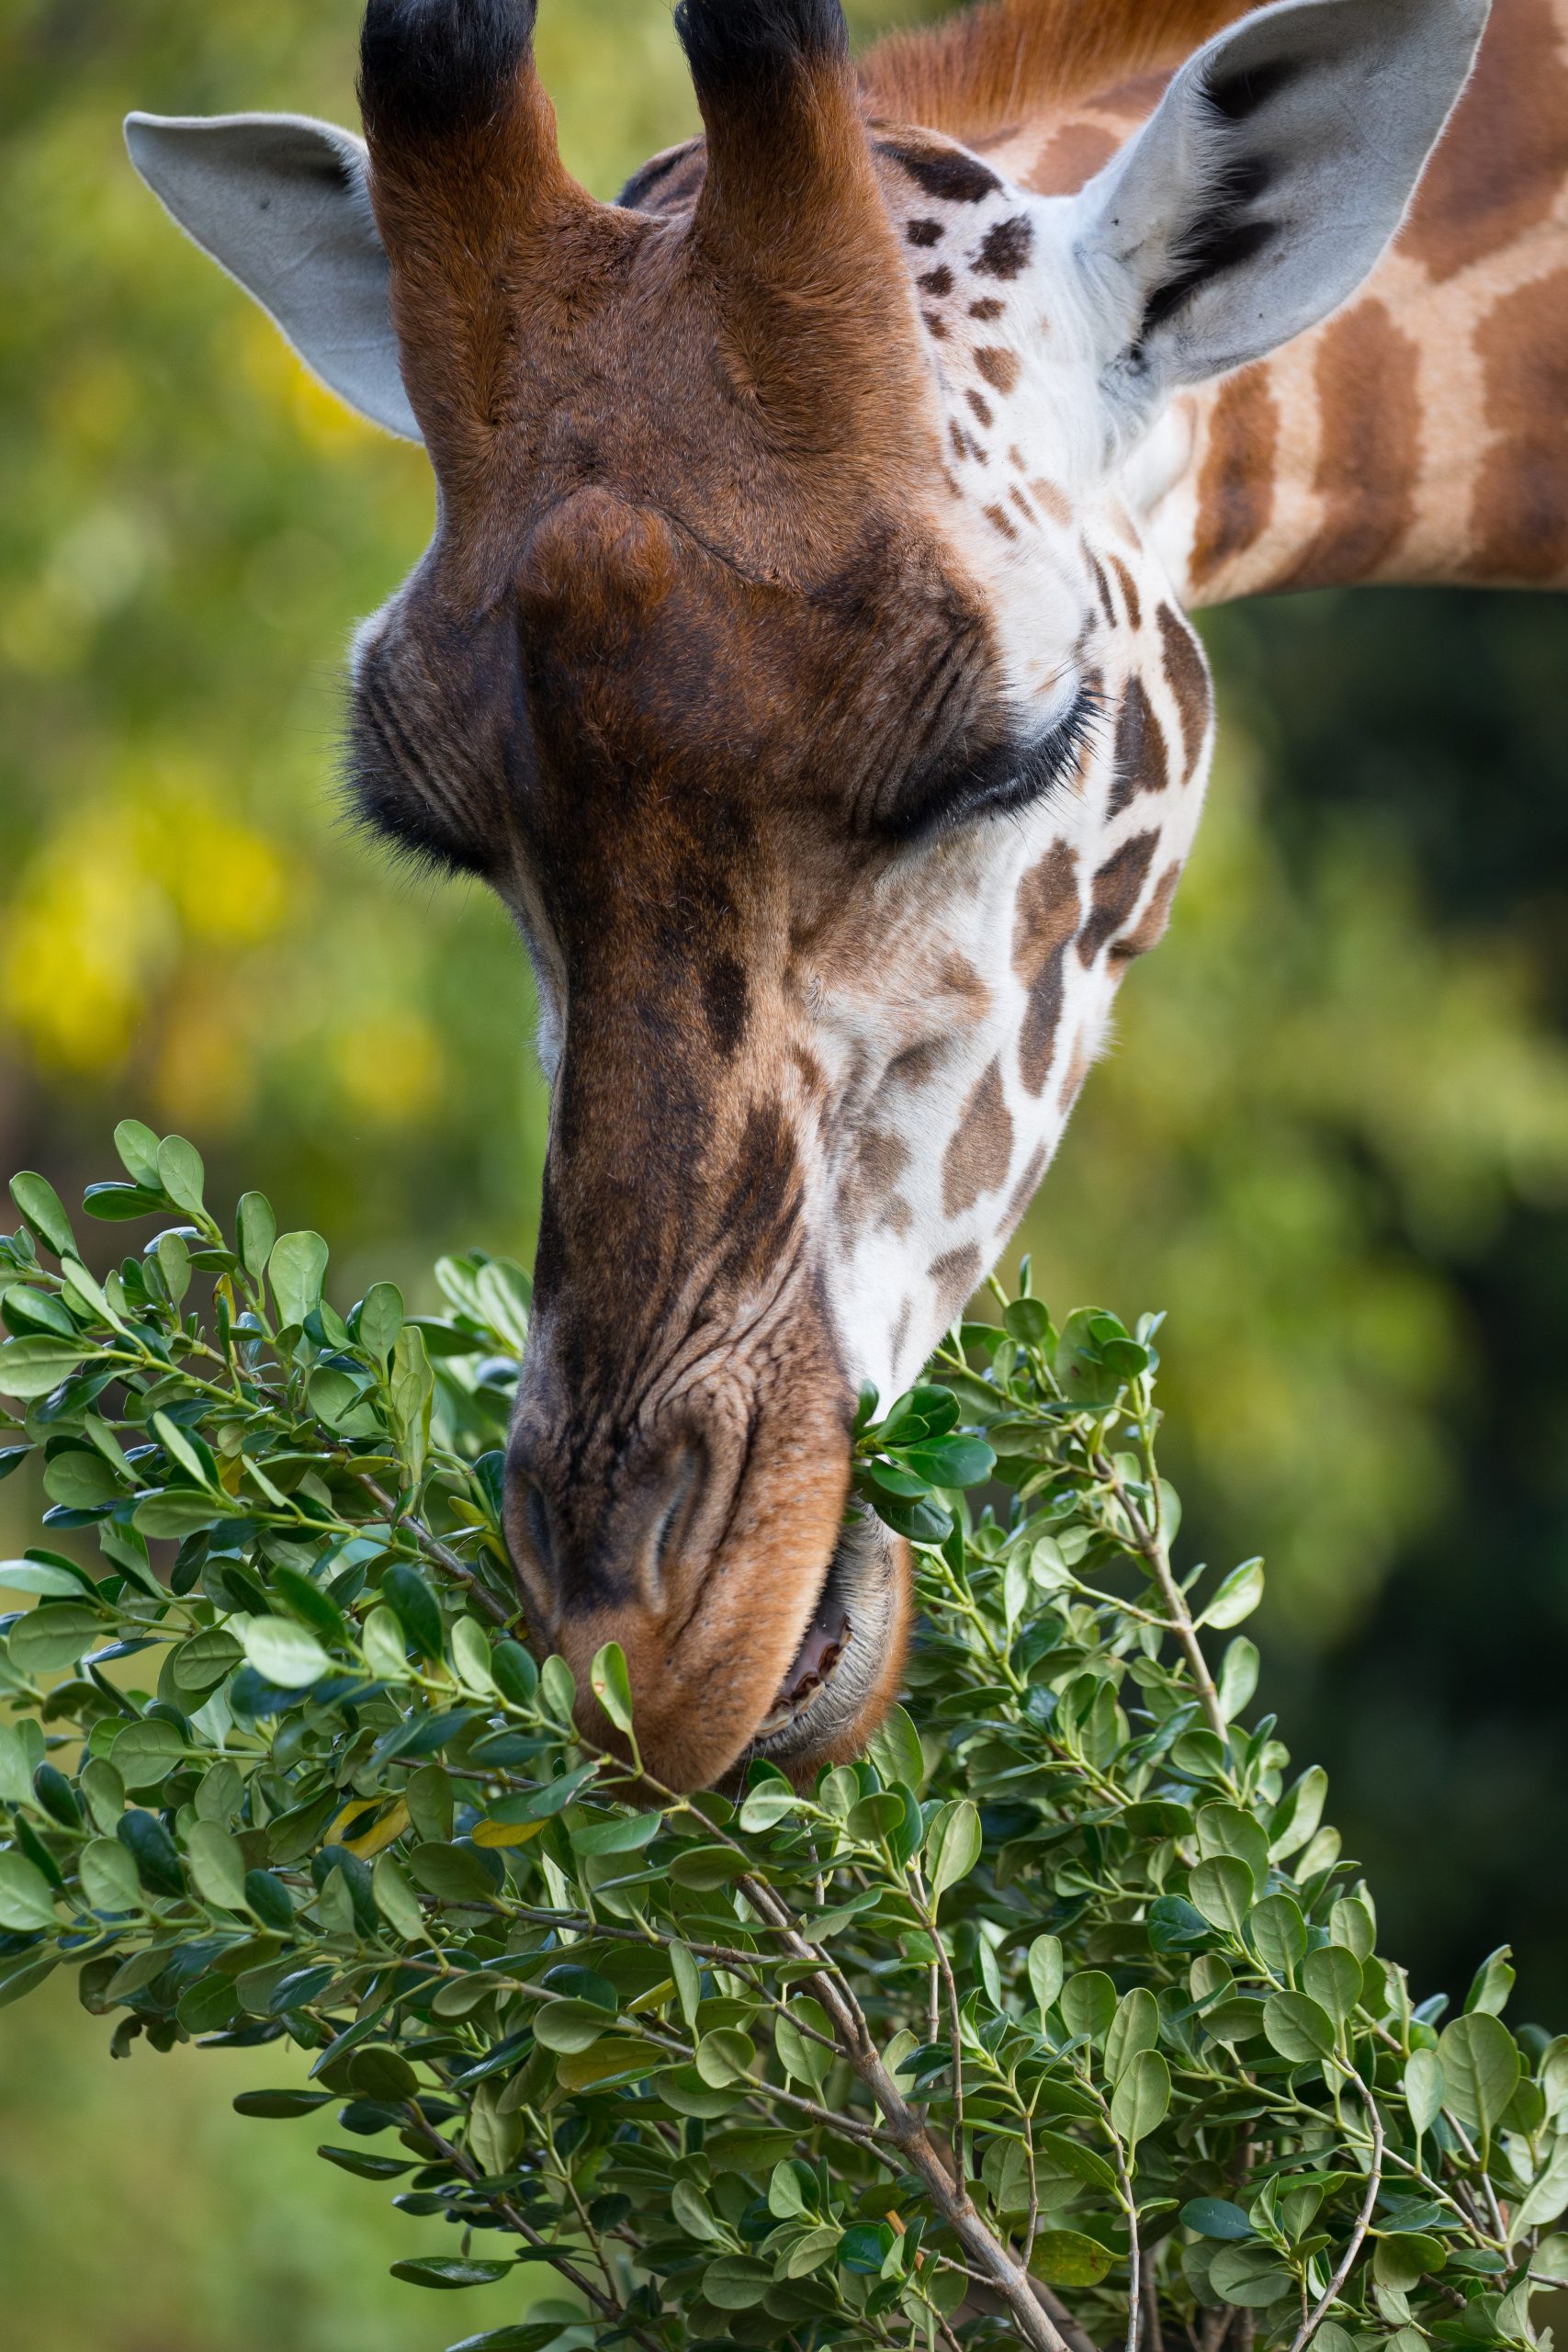 Normally f5.6 would give decent depth of field, but at this focus length you'll see that although the giraffes eyelashes are in sharp focus, it's nose has softened.  This quality of a long telephoto lens means you can get very good subject isolation without a large aperture.